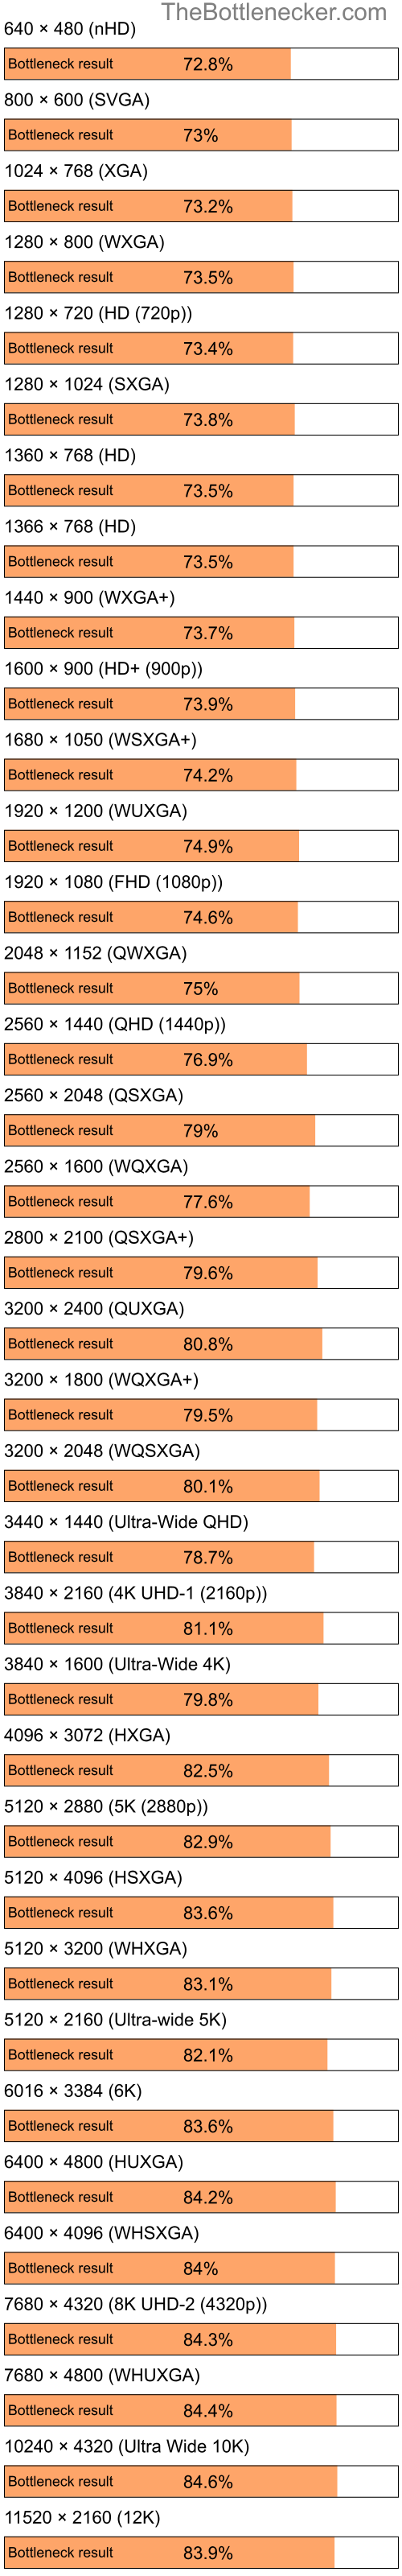 Bottleneck results by resolution for Intel Celeron M 420 and NVIDIA GeForce 9100 in Graphic Card Intense Tasks